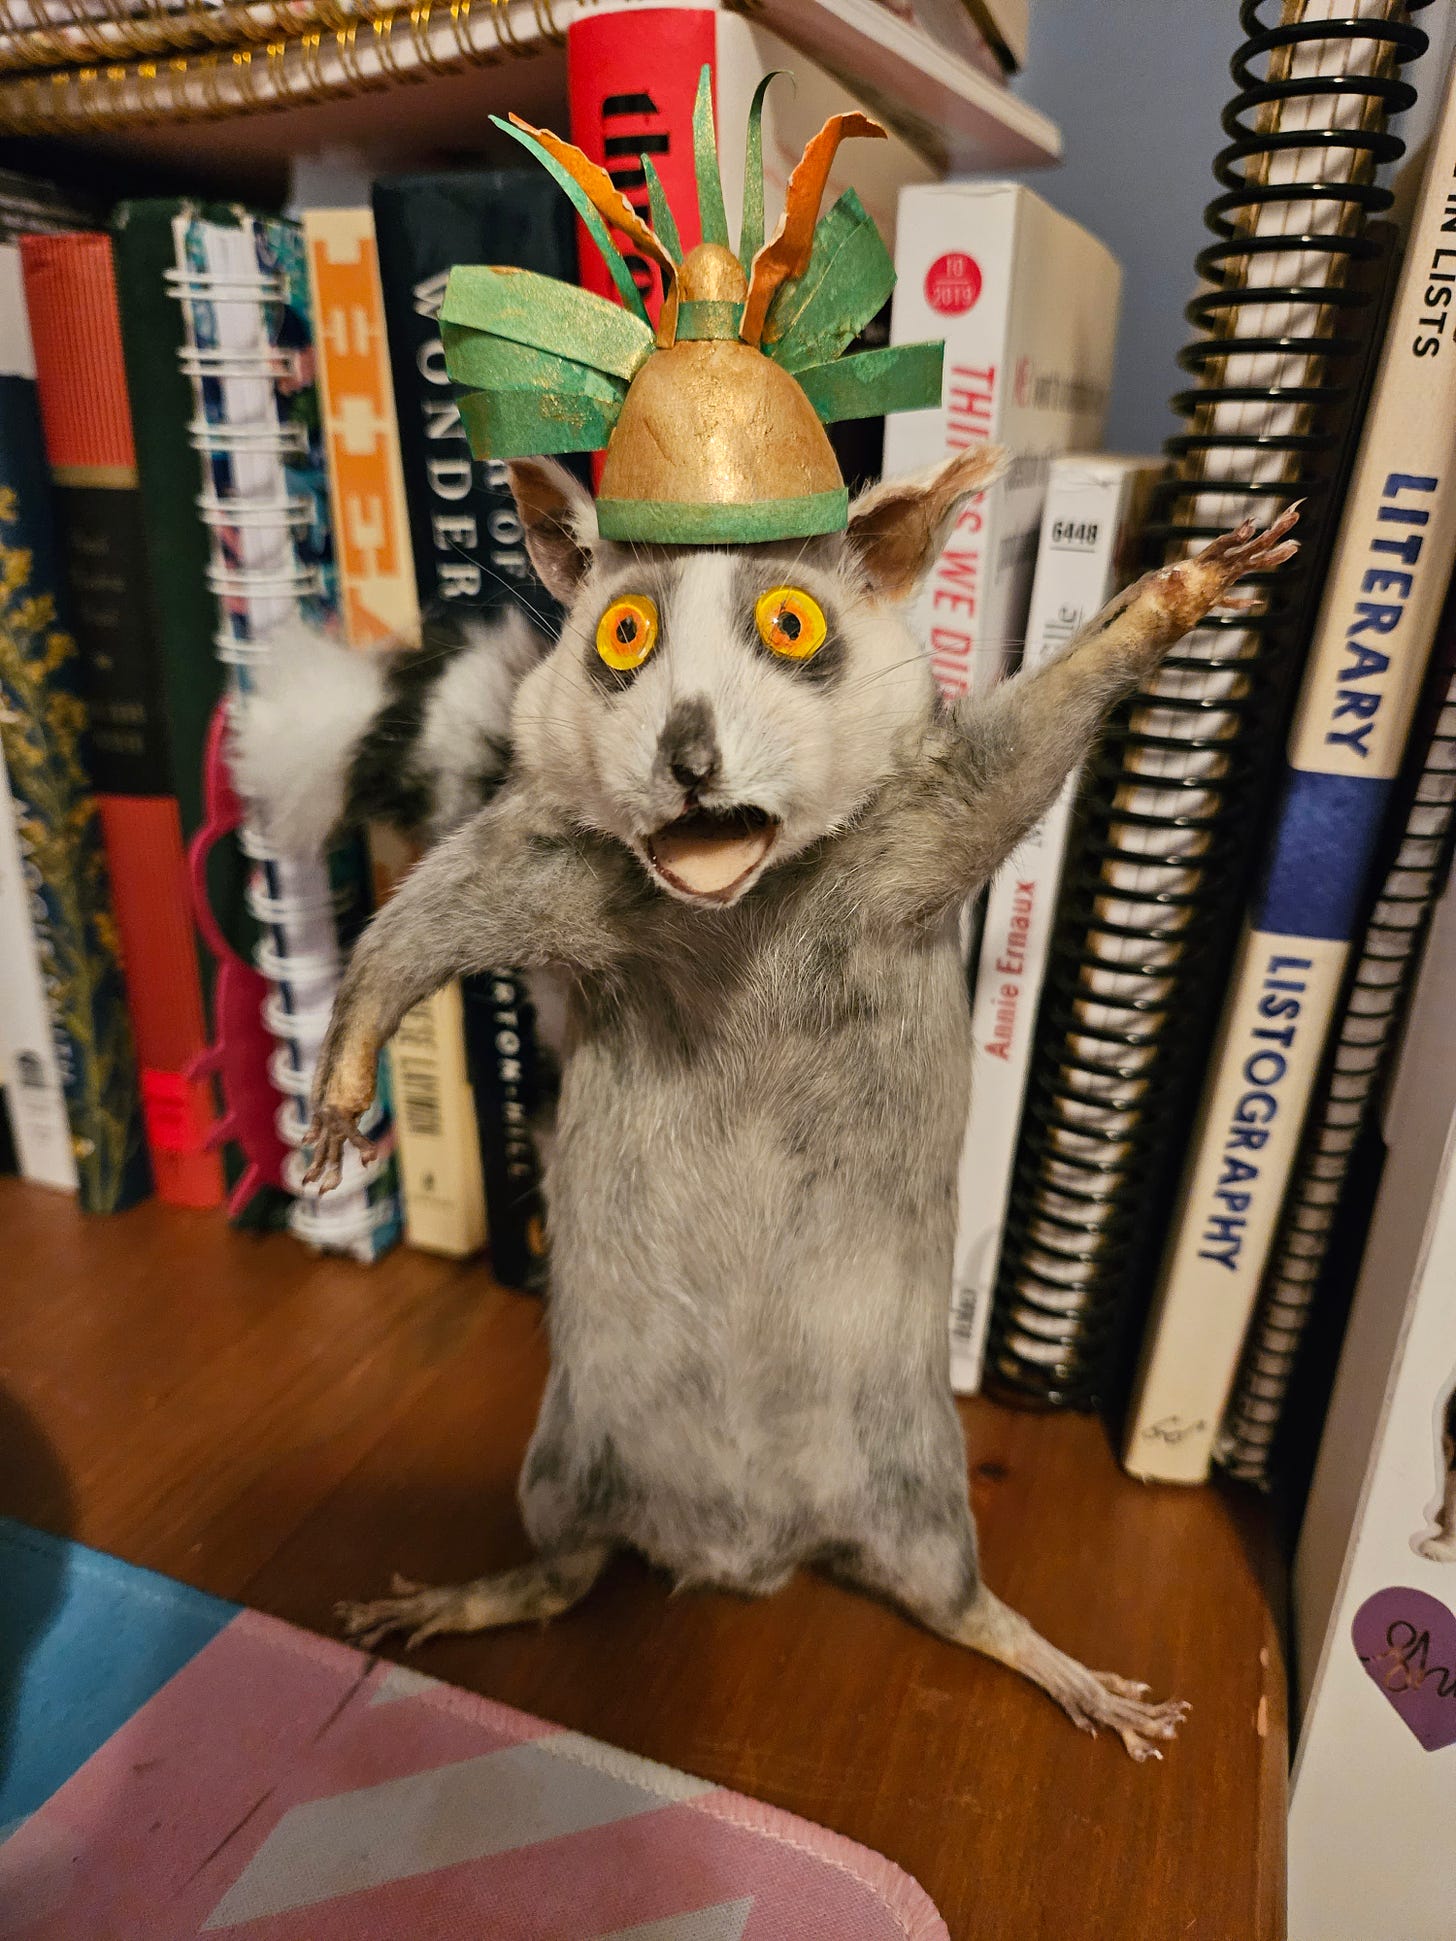 psycho looking taxidermy lemur with a party hat